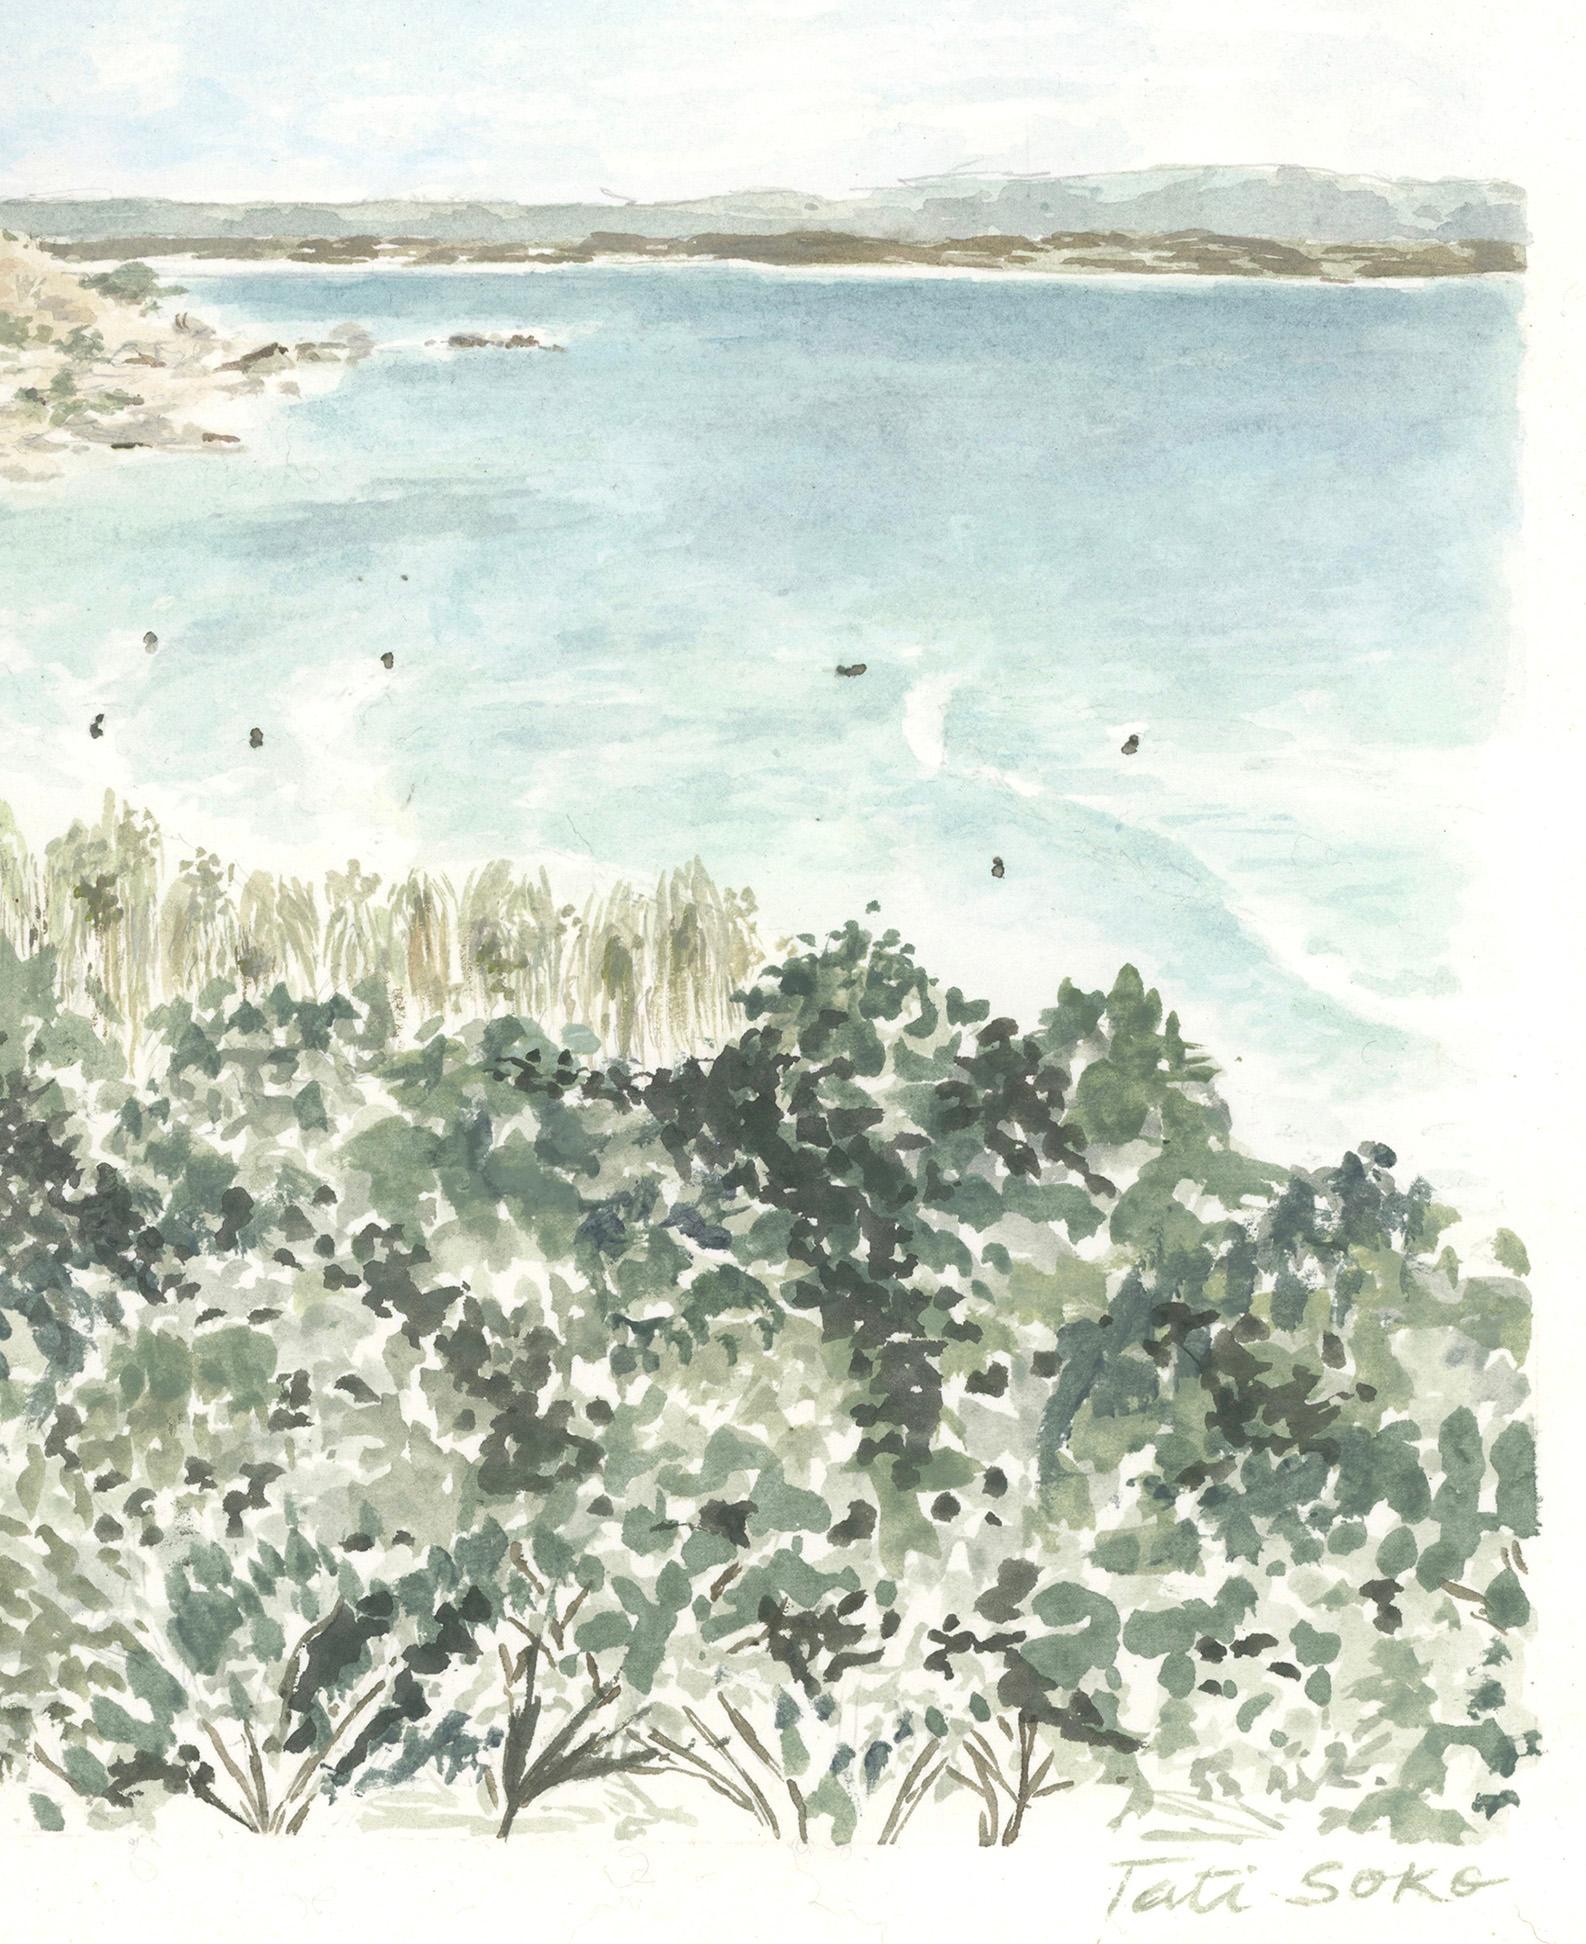 Bay
Watercolor on Archival Cotton Paper
This landscape watercolor painting reveals itself, transporting us to a serene bay where nature's harmonious beauty unfolds.The artist's brush captures a captivating interplay of colors. Within this ethereal